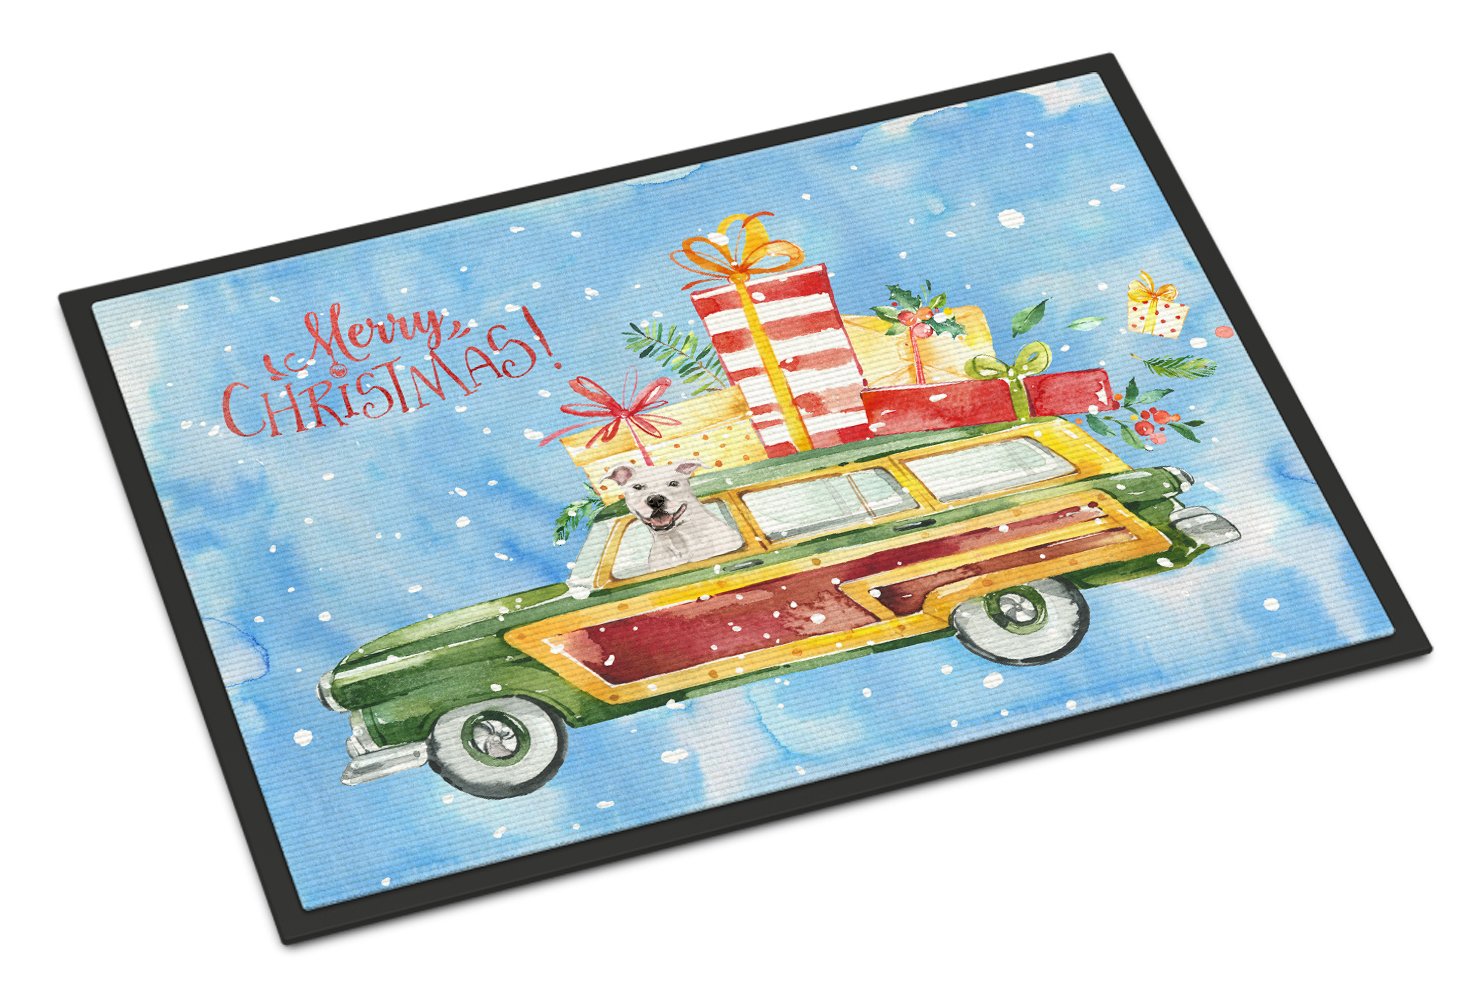 Merry Christmas White Staffordshire Bull Terrier Indoor or Outdoor Mat 24x36 CK2433JMAT by Caroline's Treasures